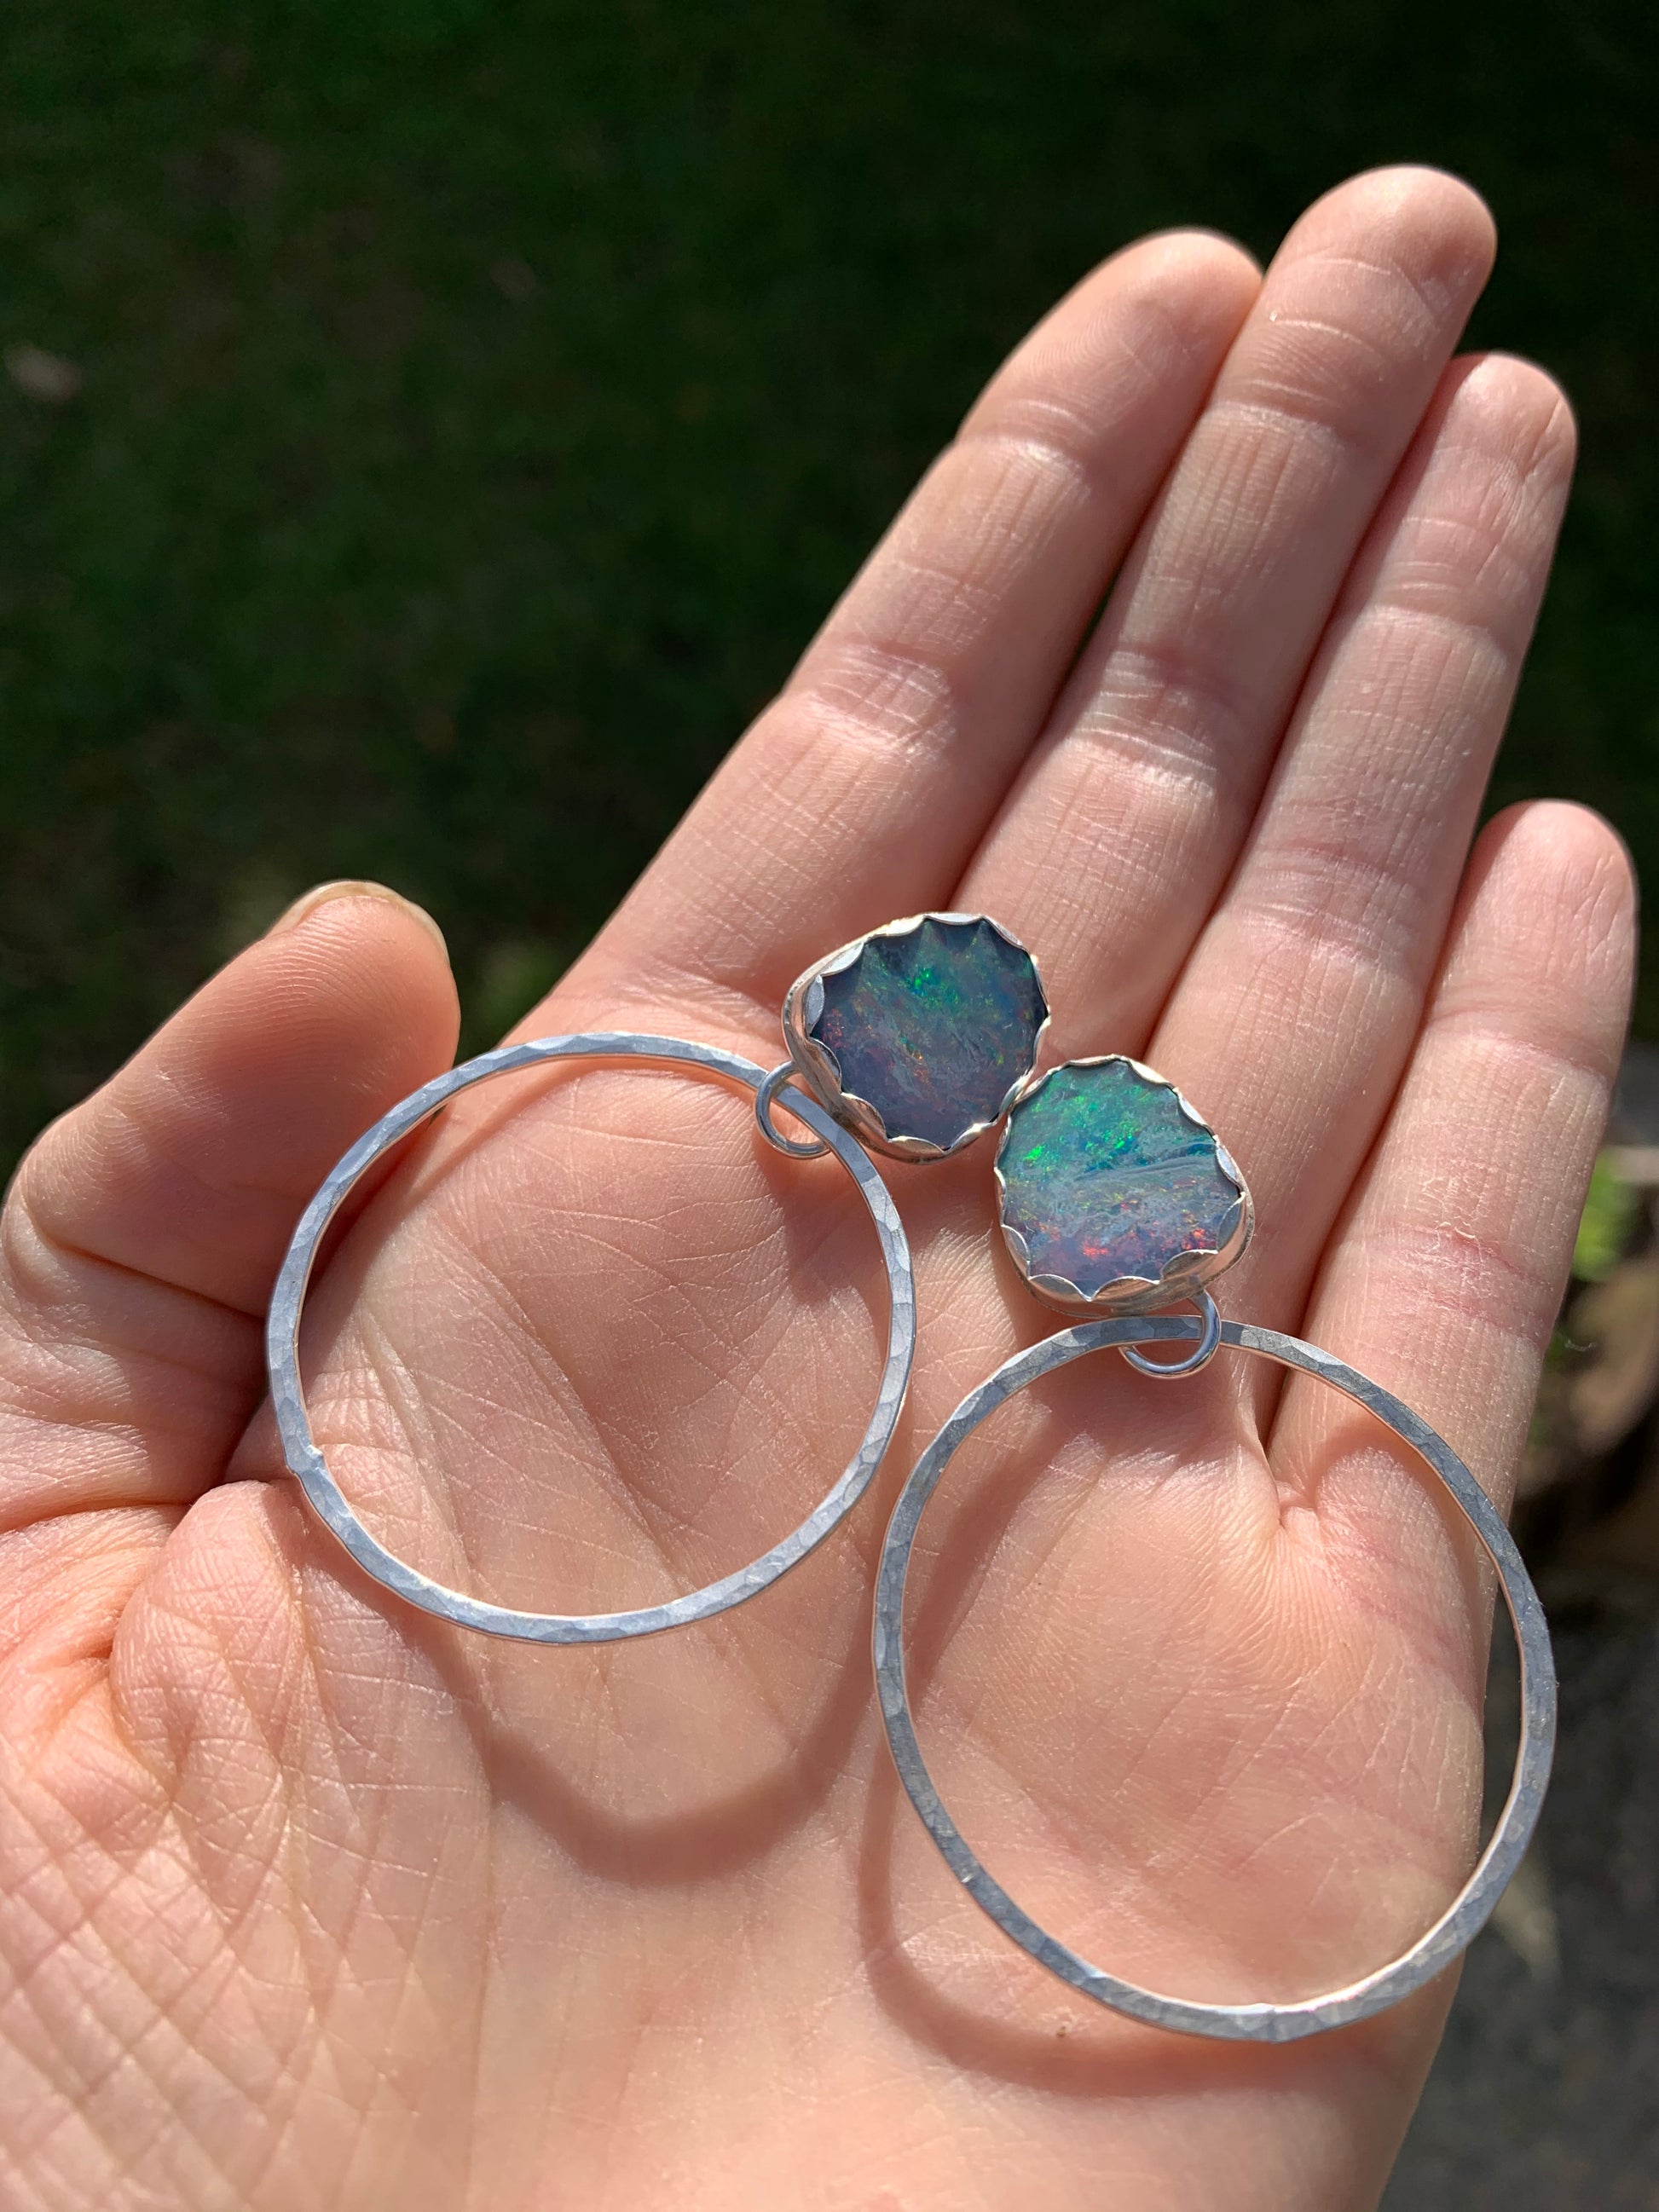 Gorgeous, colorful Australian Opal doublets are set in fine silver on handmade posts. Sterling silver hoops hang below. These earrings are one of a kind!